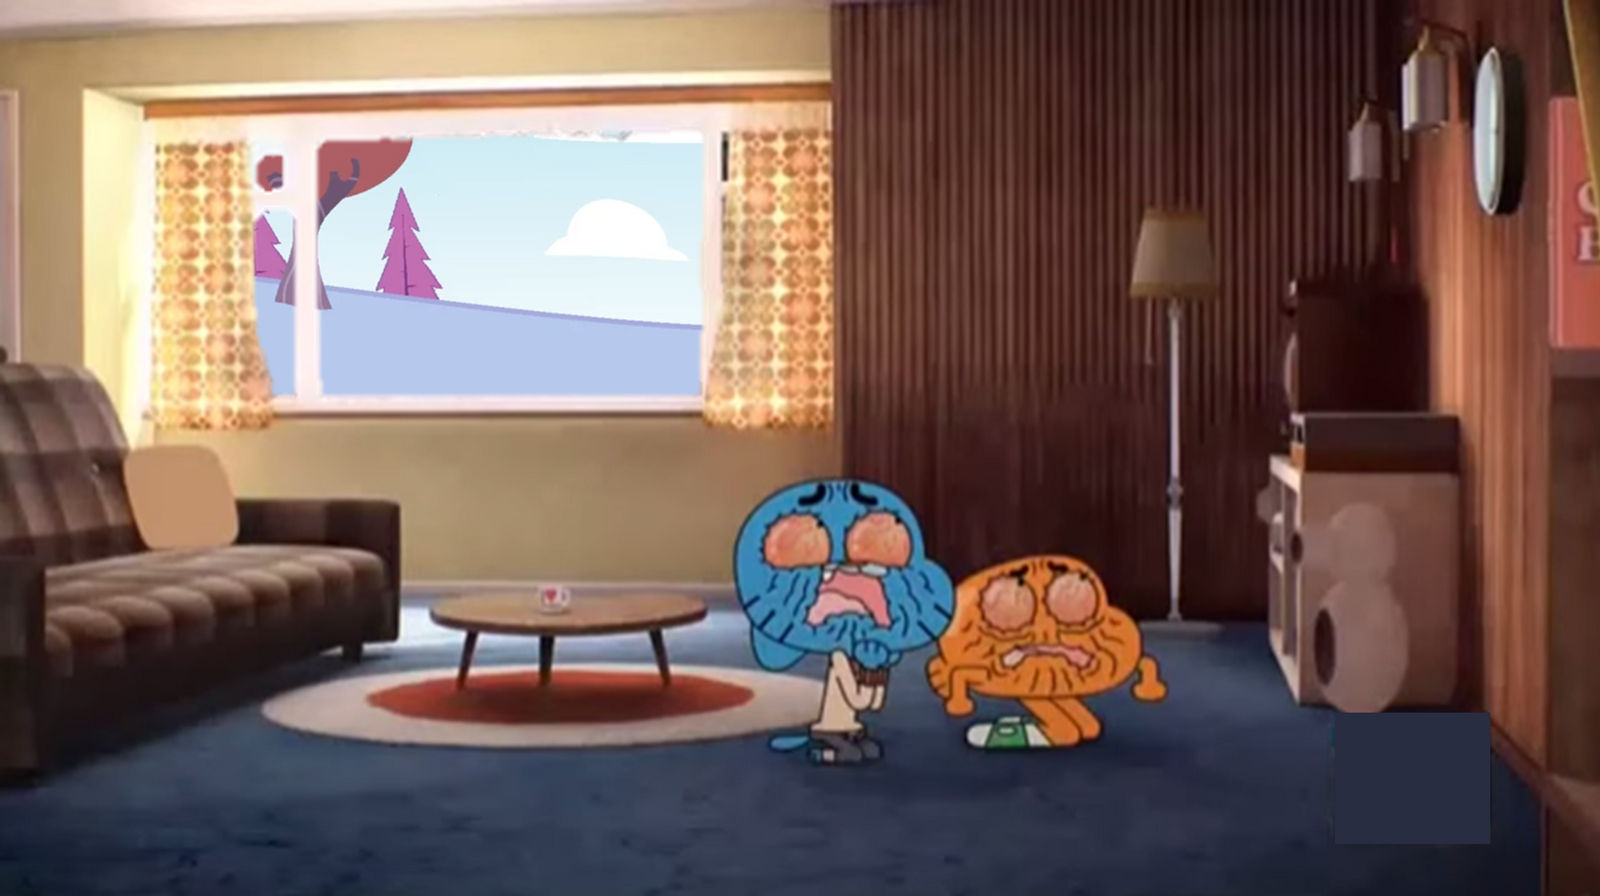 Gumball crossover with HTF background by KaplanBoys214 on DeviantArt